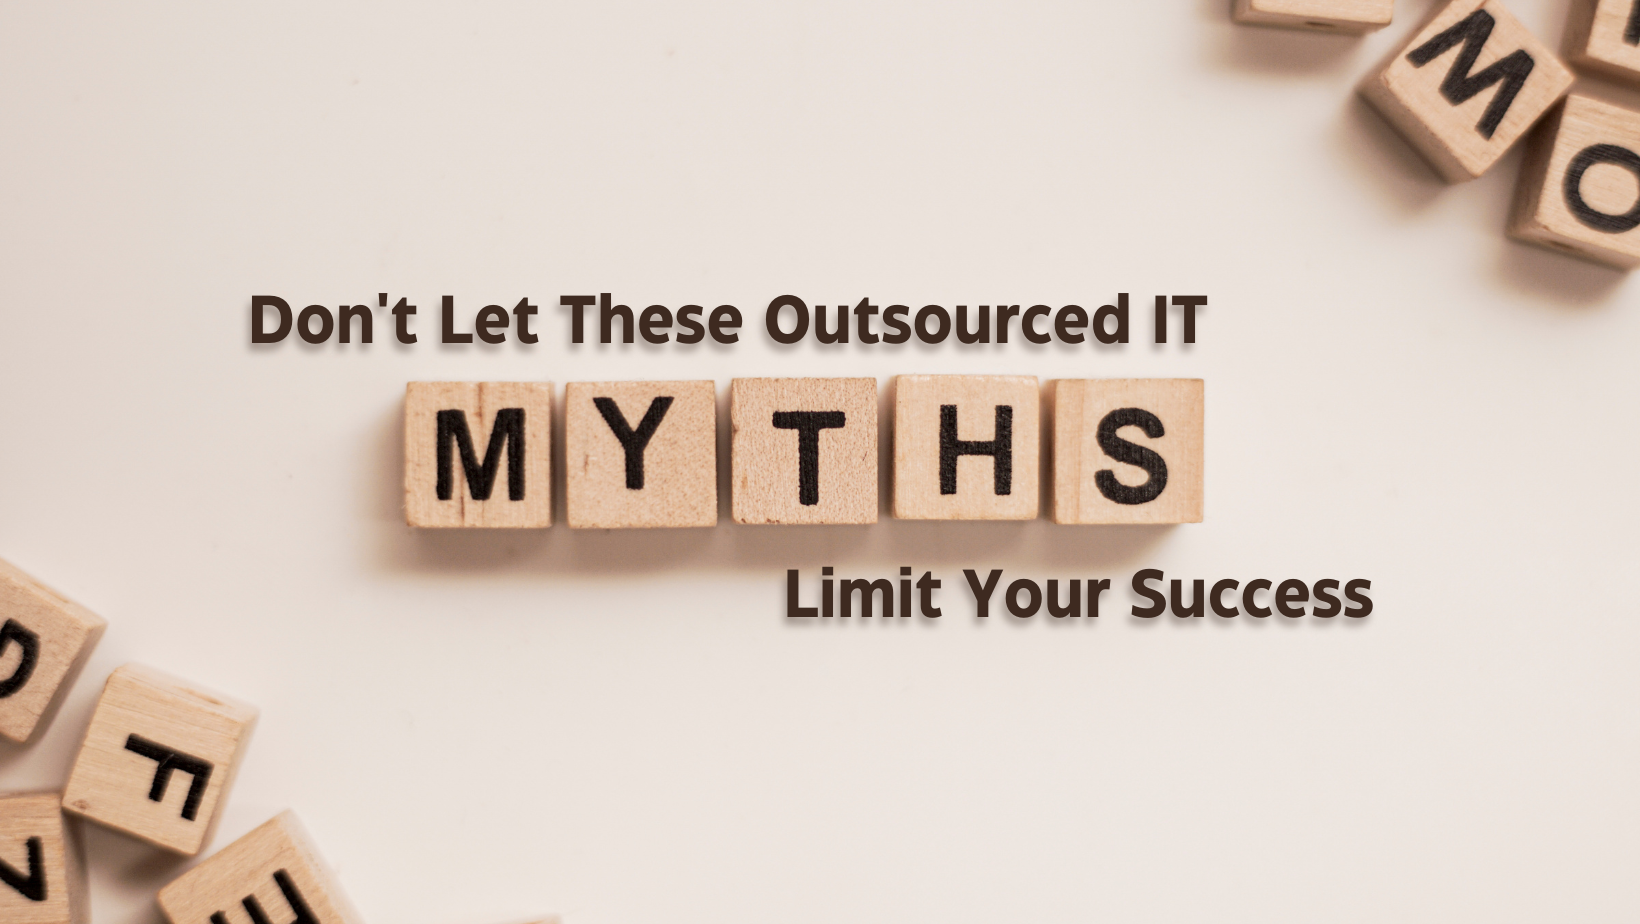 Don’t Let These Outsourced IT Myths Limit Your Success